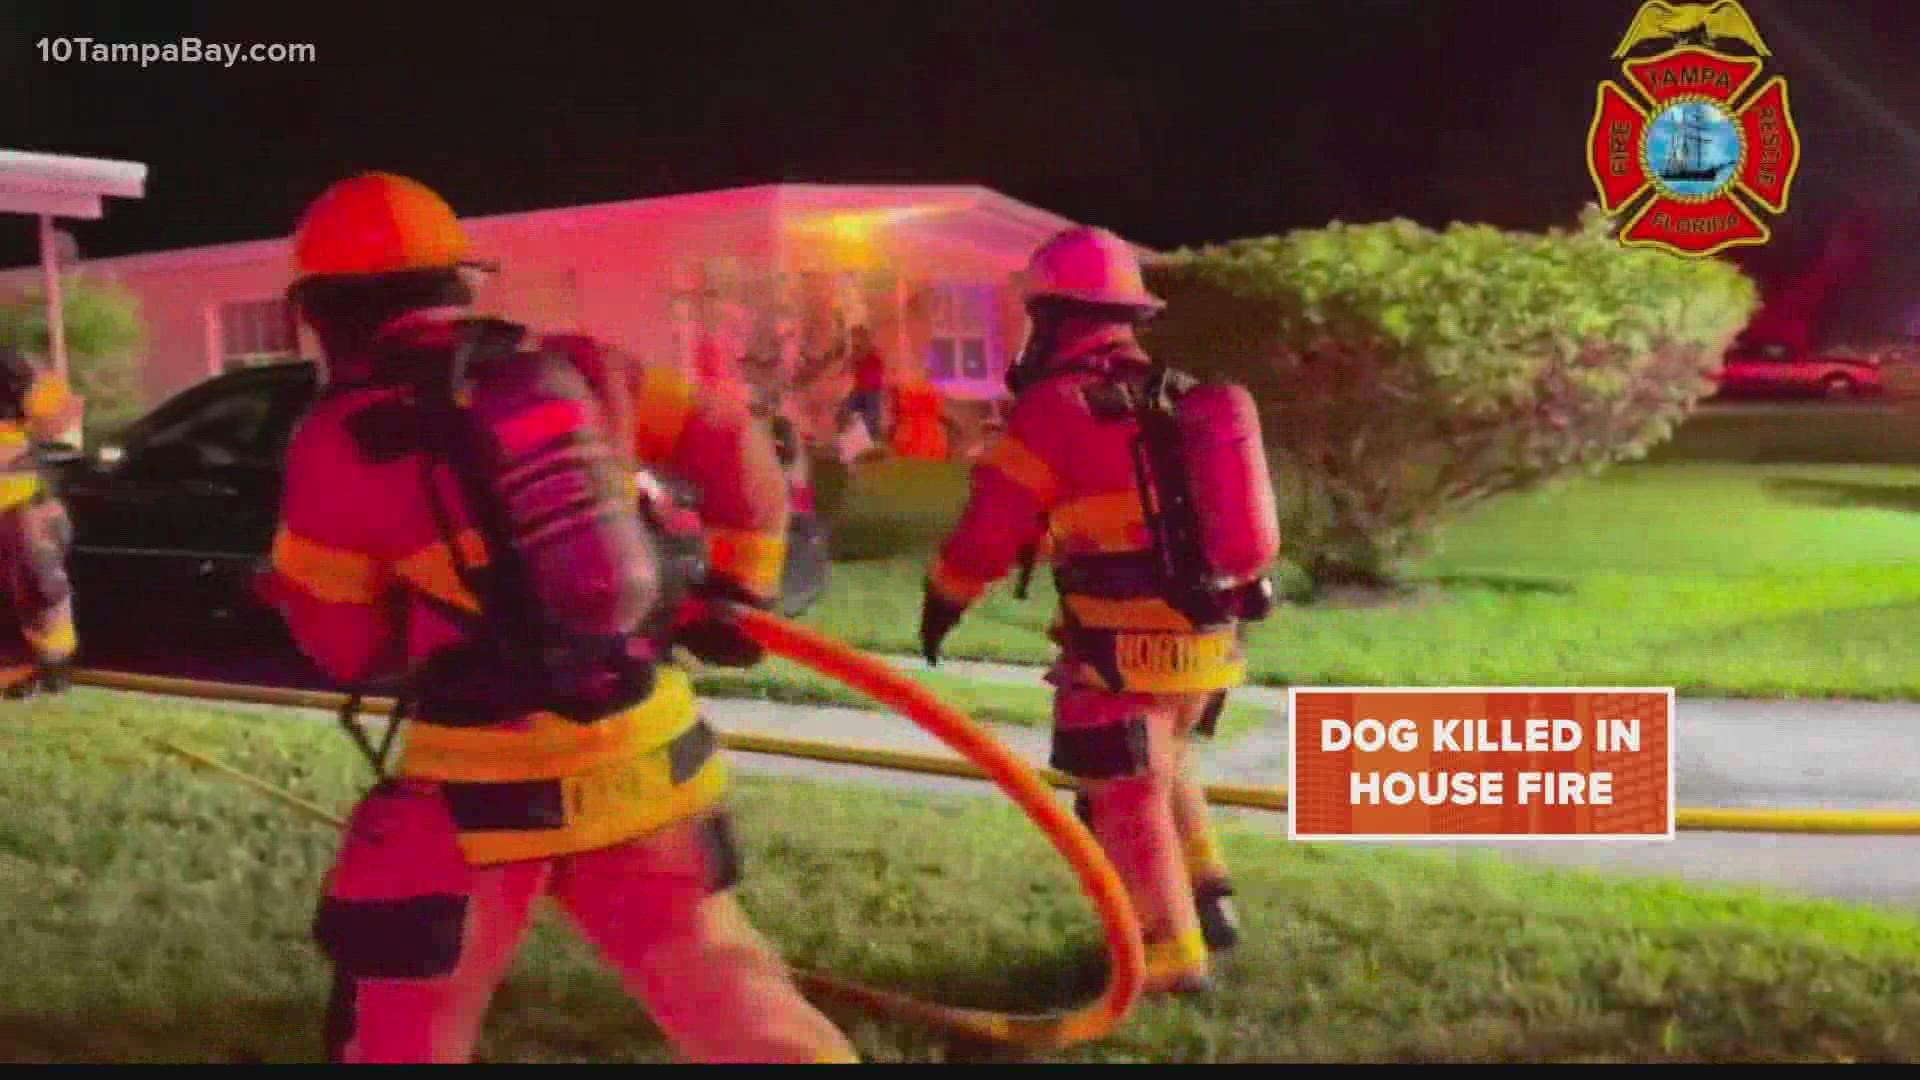 Everyone was able to exit the home, however, the homeowner said the dog was still inside.